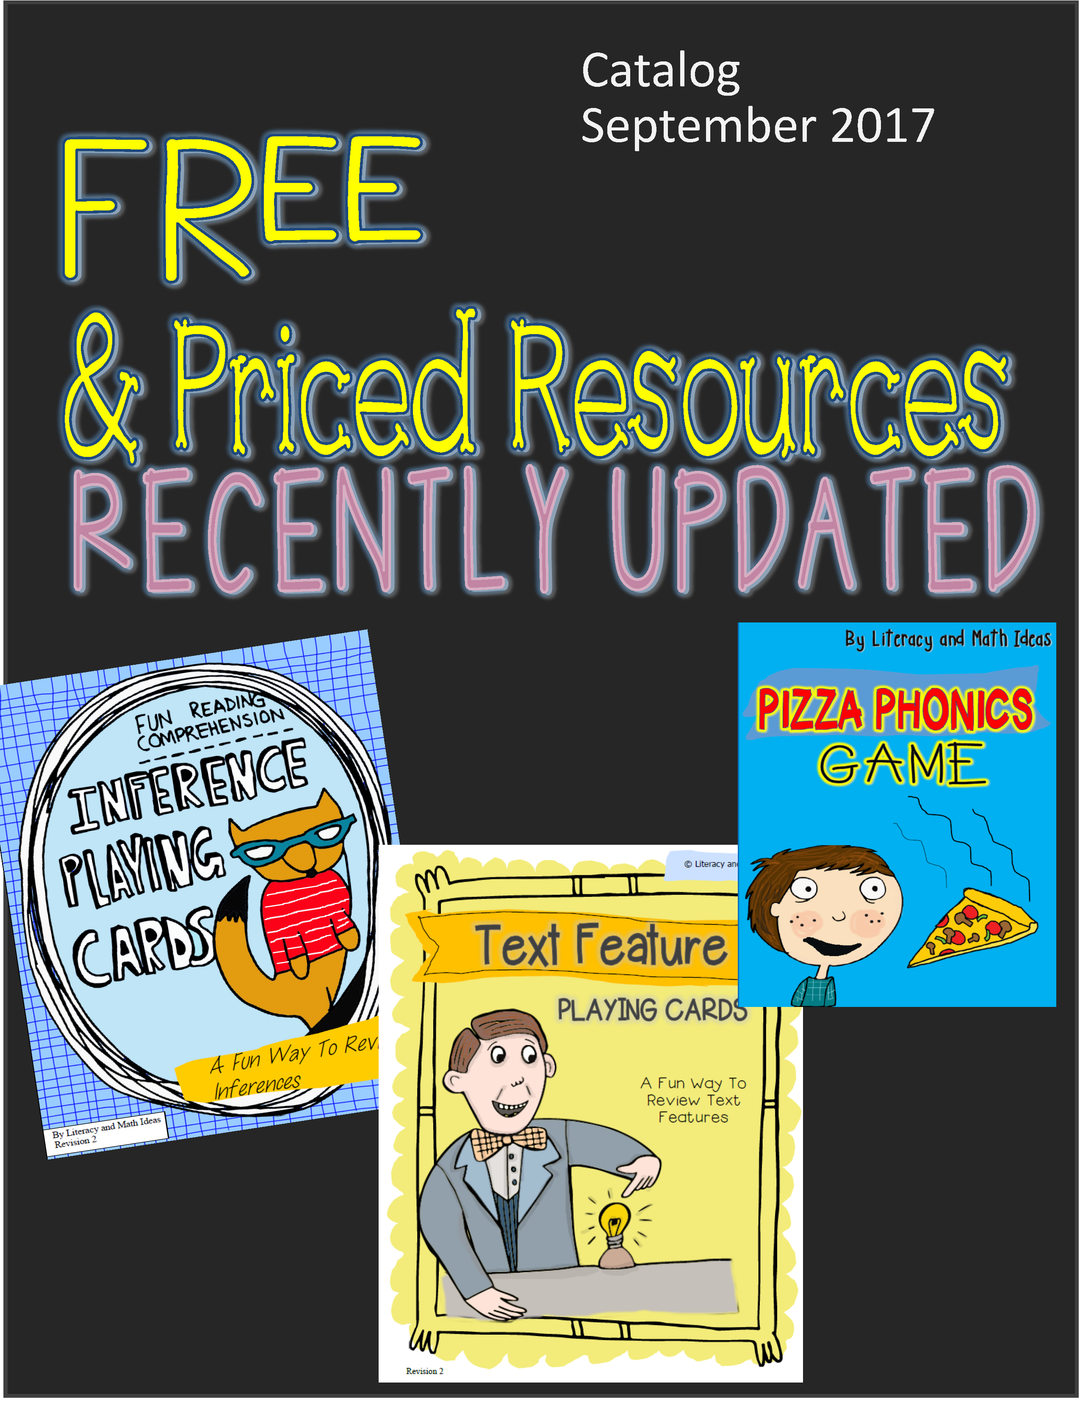 Free and Priced Resources (Recently Updated)